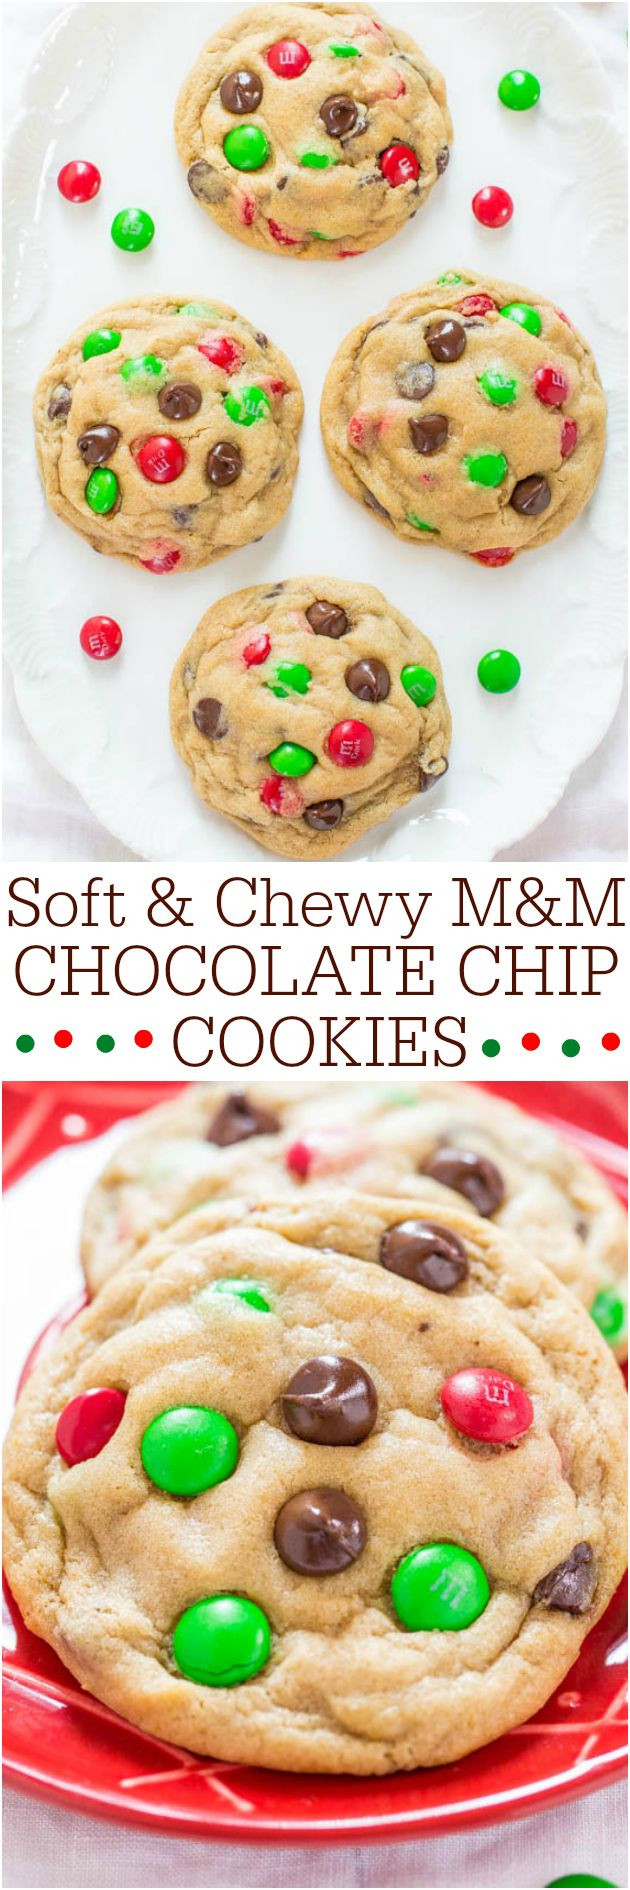 M&amp;M Christmas Cookies Recipe
 Soft and Chewy M&M Chocolate Chip Cookies If you re